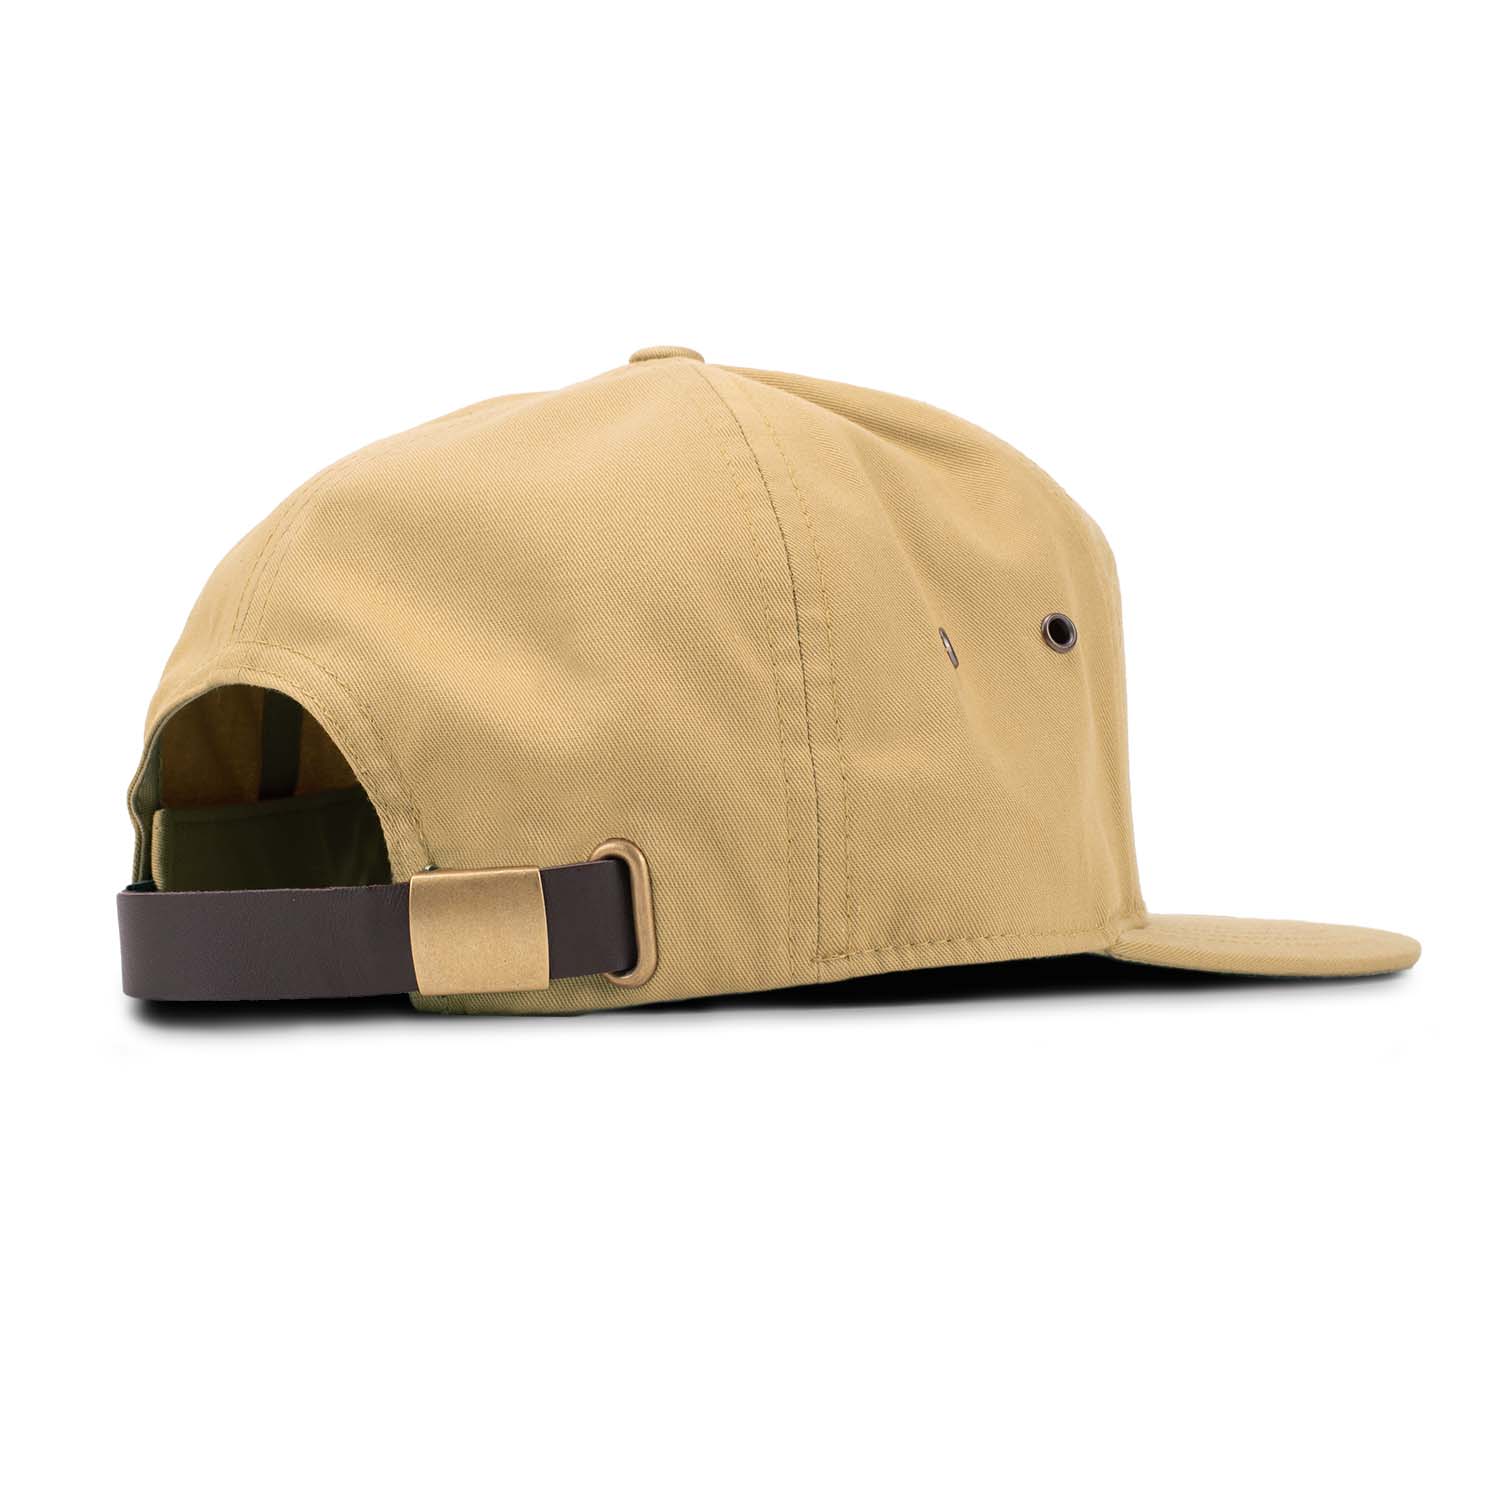 Back view of the biscuit tan 7 panel style hat showing the adjustable leather strapback with brass clasp closure and brass eyelets